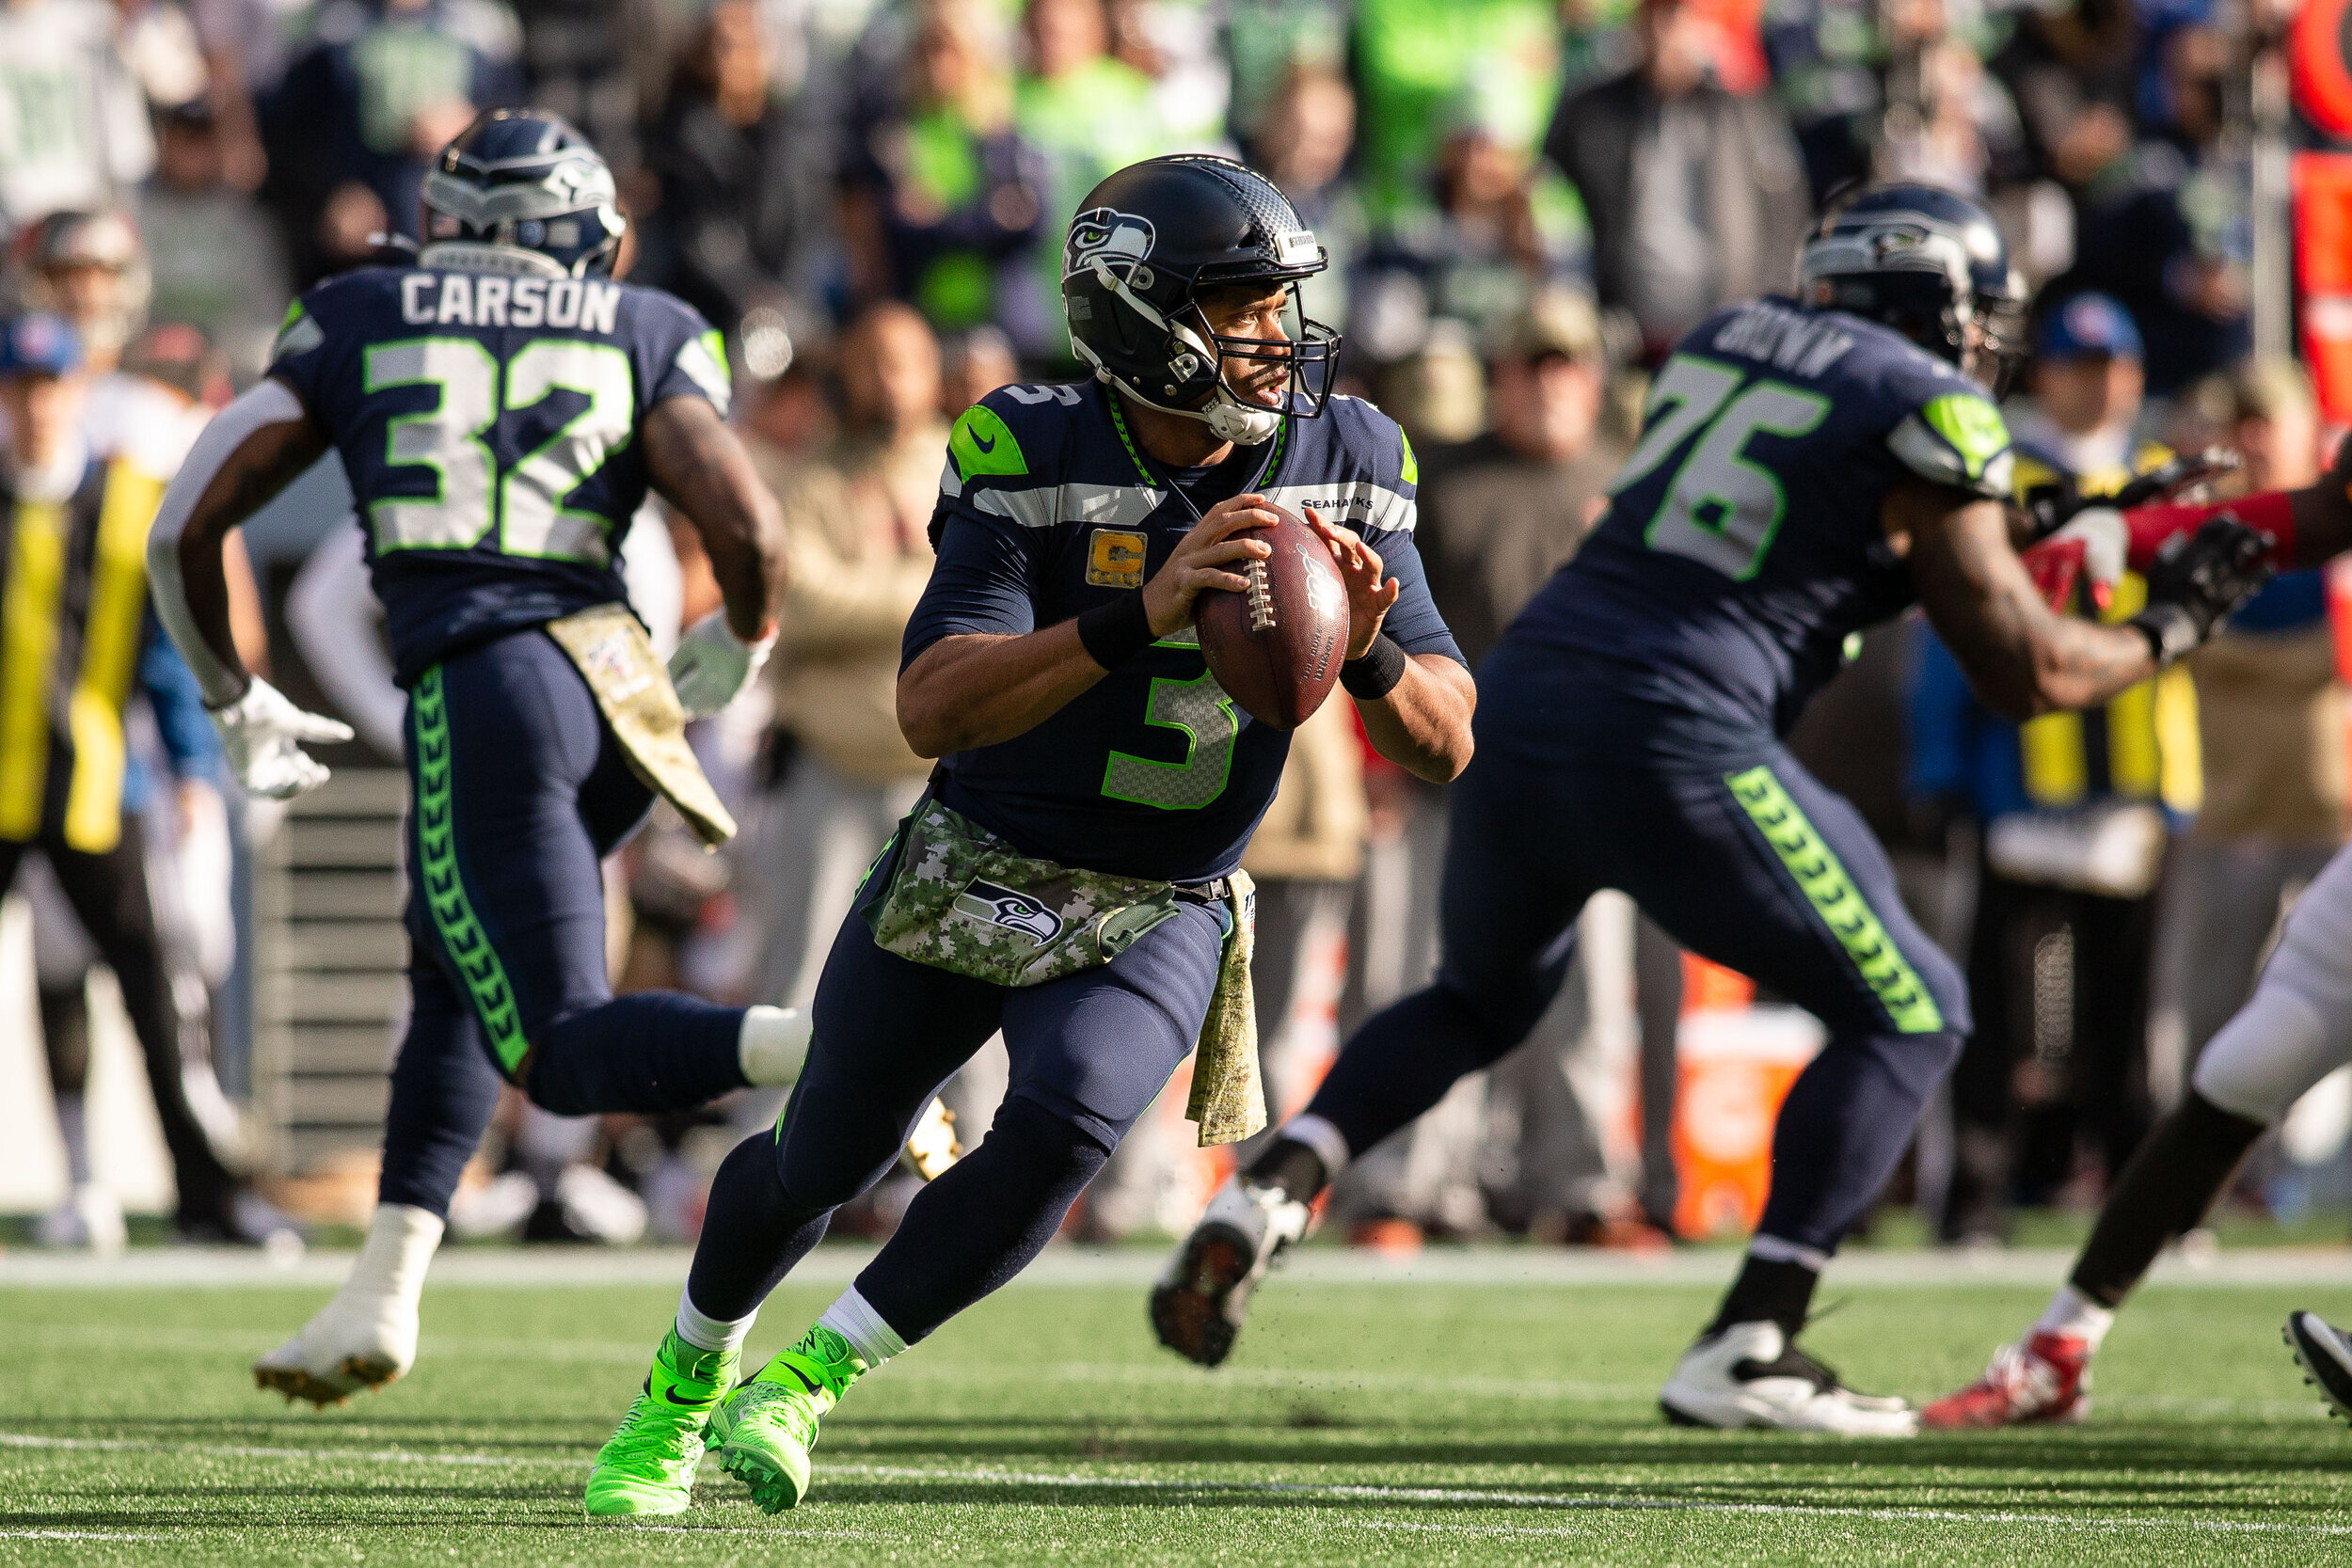  Seattle Seahawks quarterback Russell Wilson (3) throws the ball during the first quarter of an NFL football game against the Tampa Bay Buccaneers, Sunday, Nov. 3, 2019, in Seattle. Seattle defeated Tampa Bay 40-34 in overtime. (Matt Ferris/Image of 